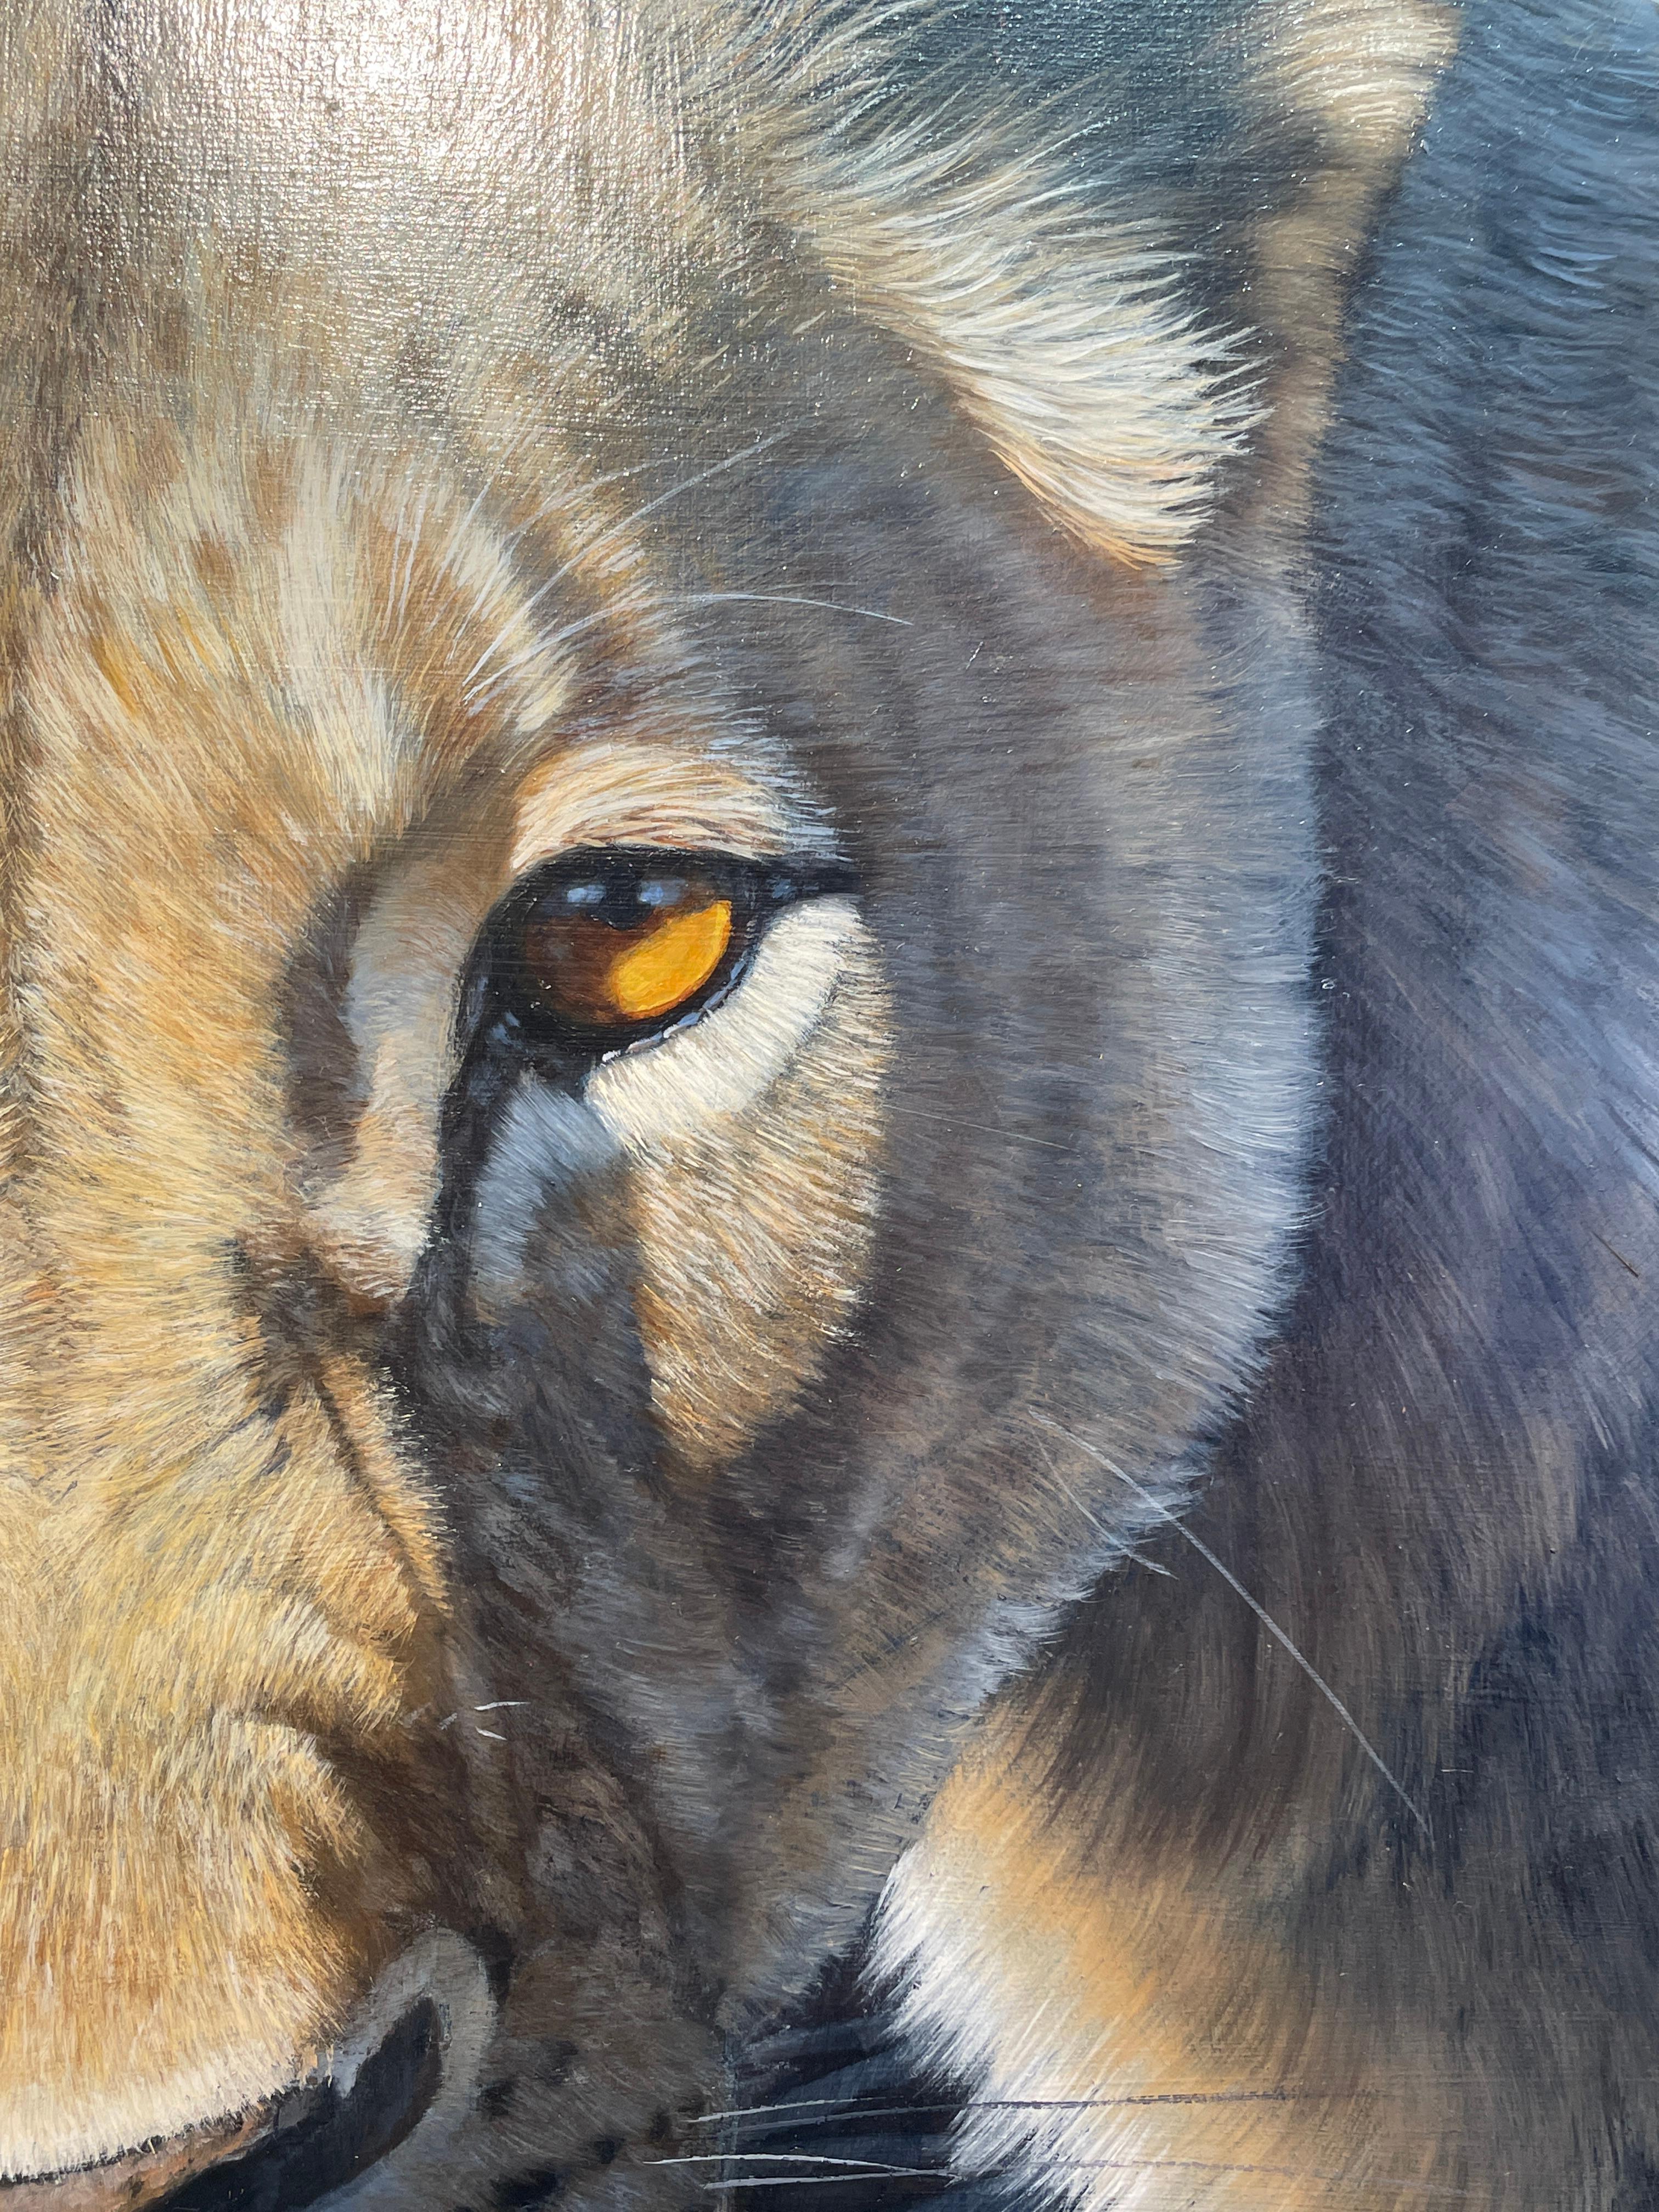 'Lioness' by Ben Waddams is a Contemporary Realist Wildlife oil painting of a lioness stalking in the wild.  With such incredible detail, it would be a statement in any interior setting. 

Ben Waddams is a British wildlife artist living and working